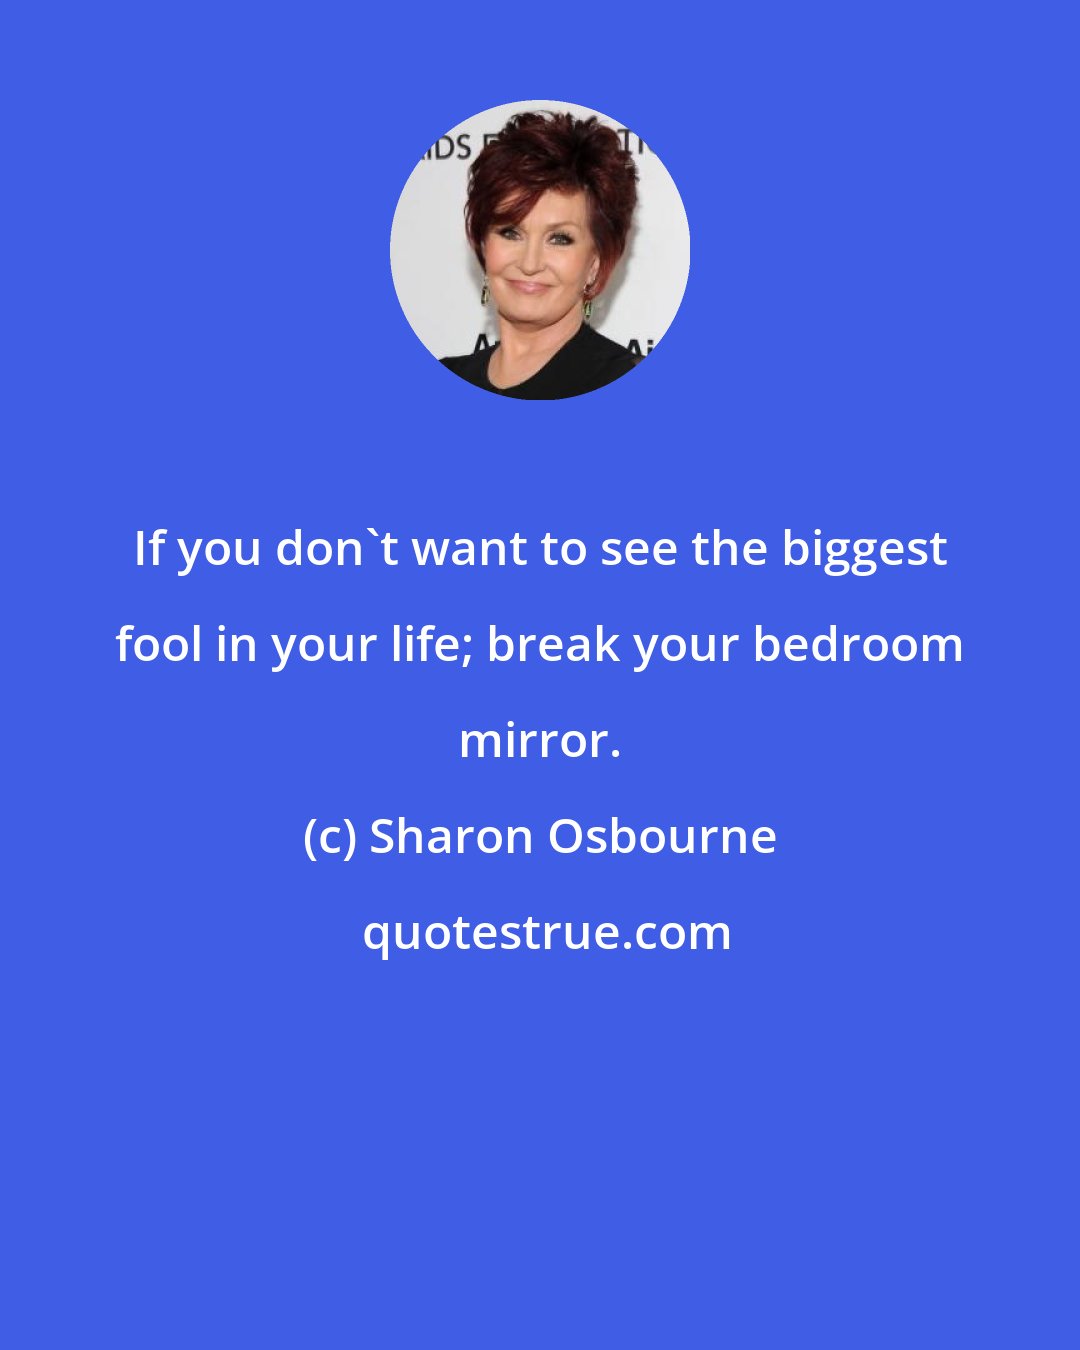 Sharon Osbourne: If you don't want to see the biggest fool in your life; break your bedroom mirror.